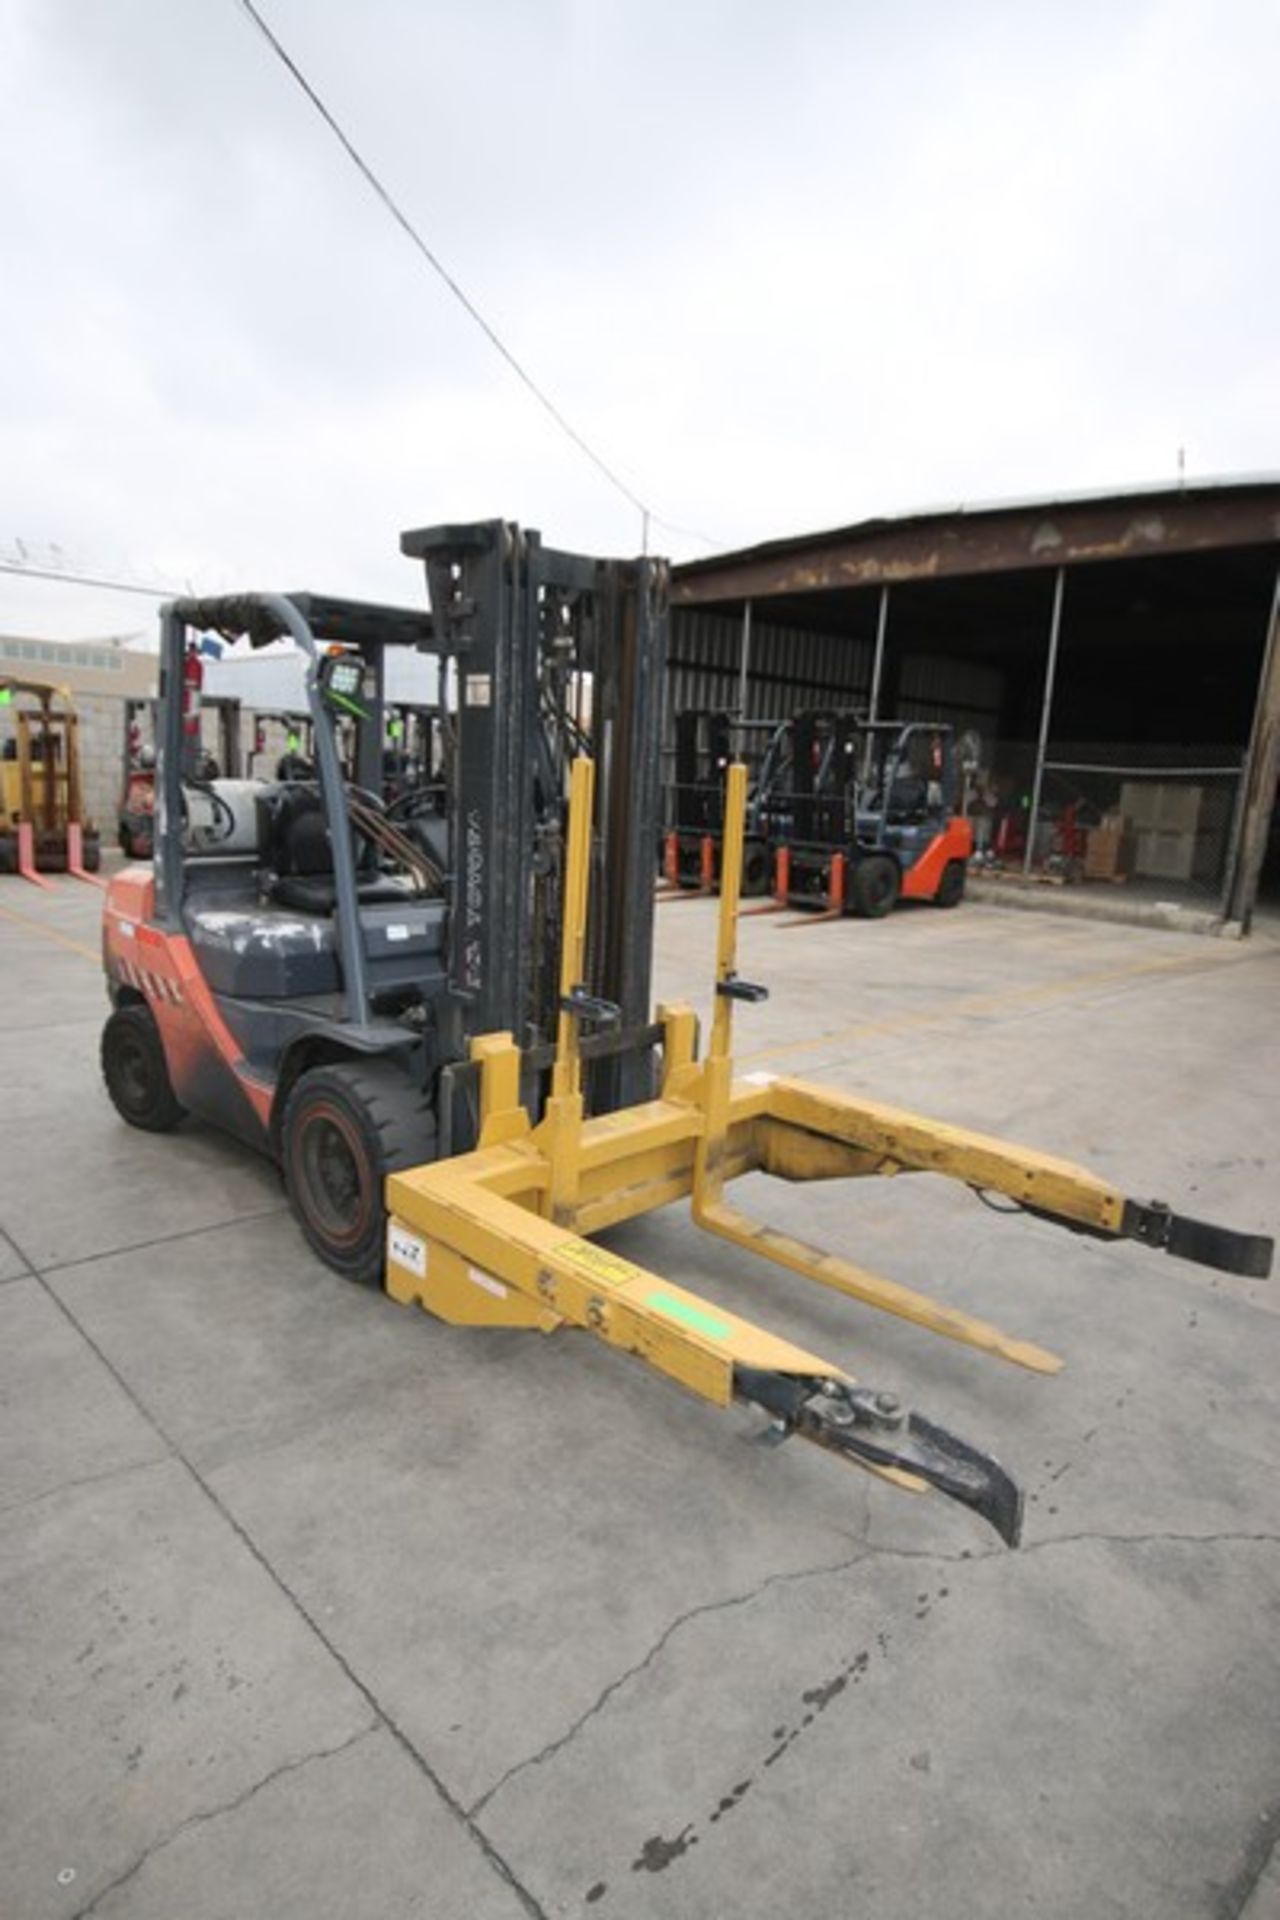 Toyota 5,650 lb. Sit-Down Propane Forklift, M/N 8FGU30, S/N 12793, with 3-Stage Mast, with